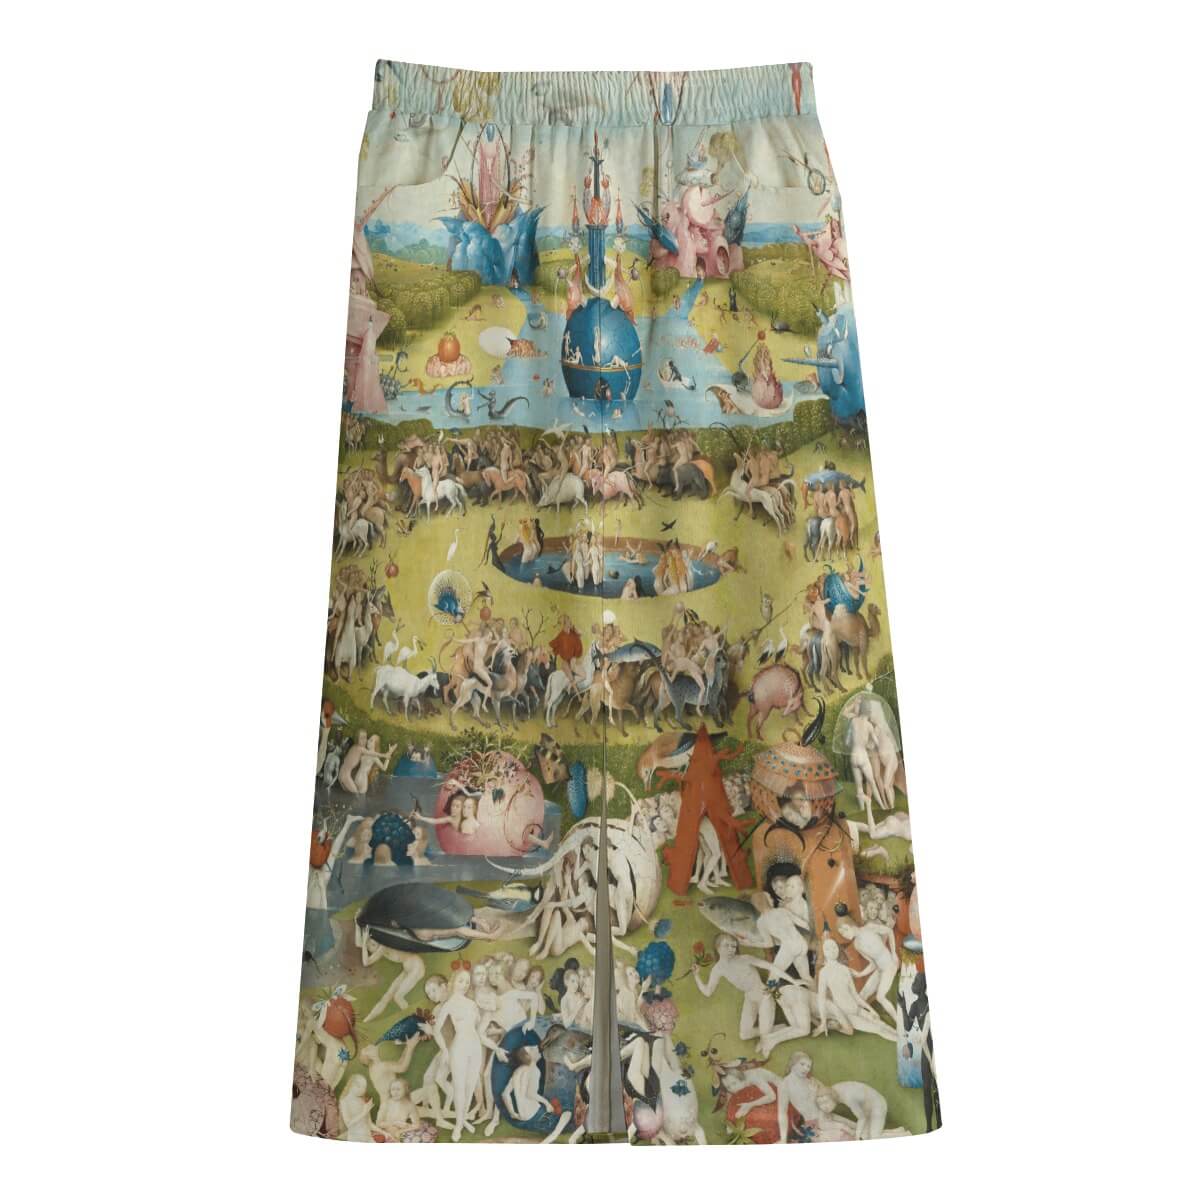 Garden of Earthly Delights Women's Fashion